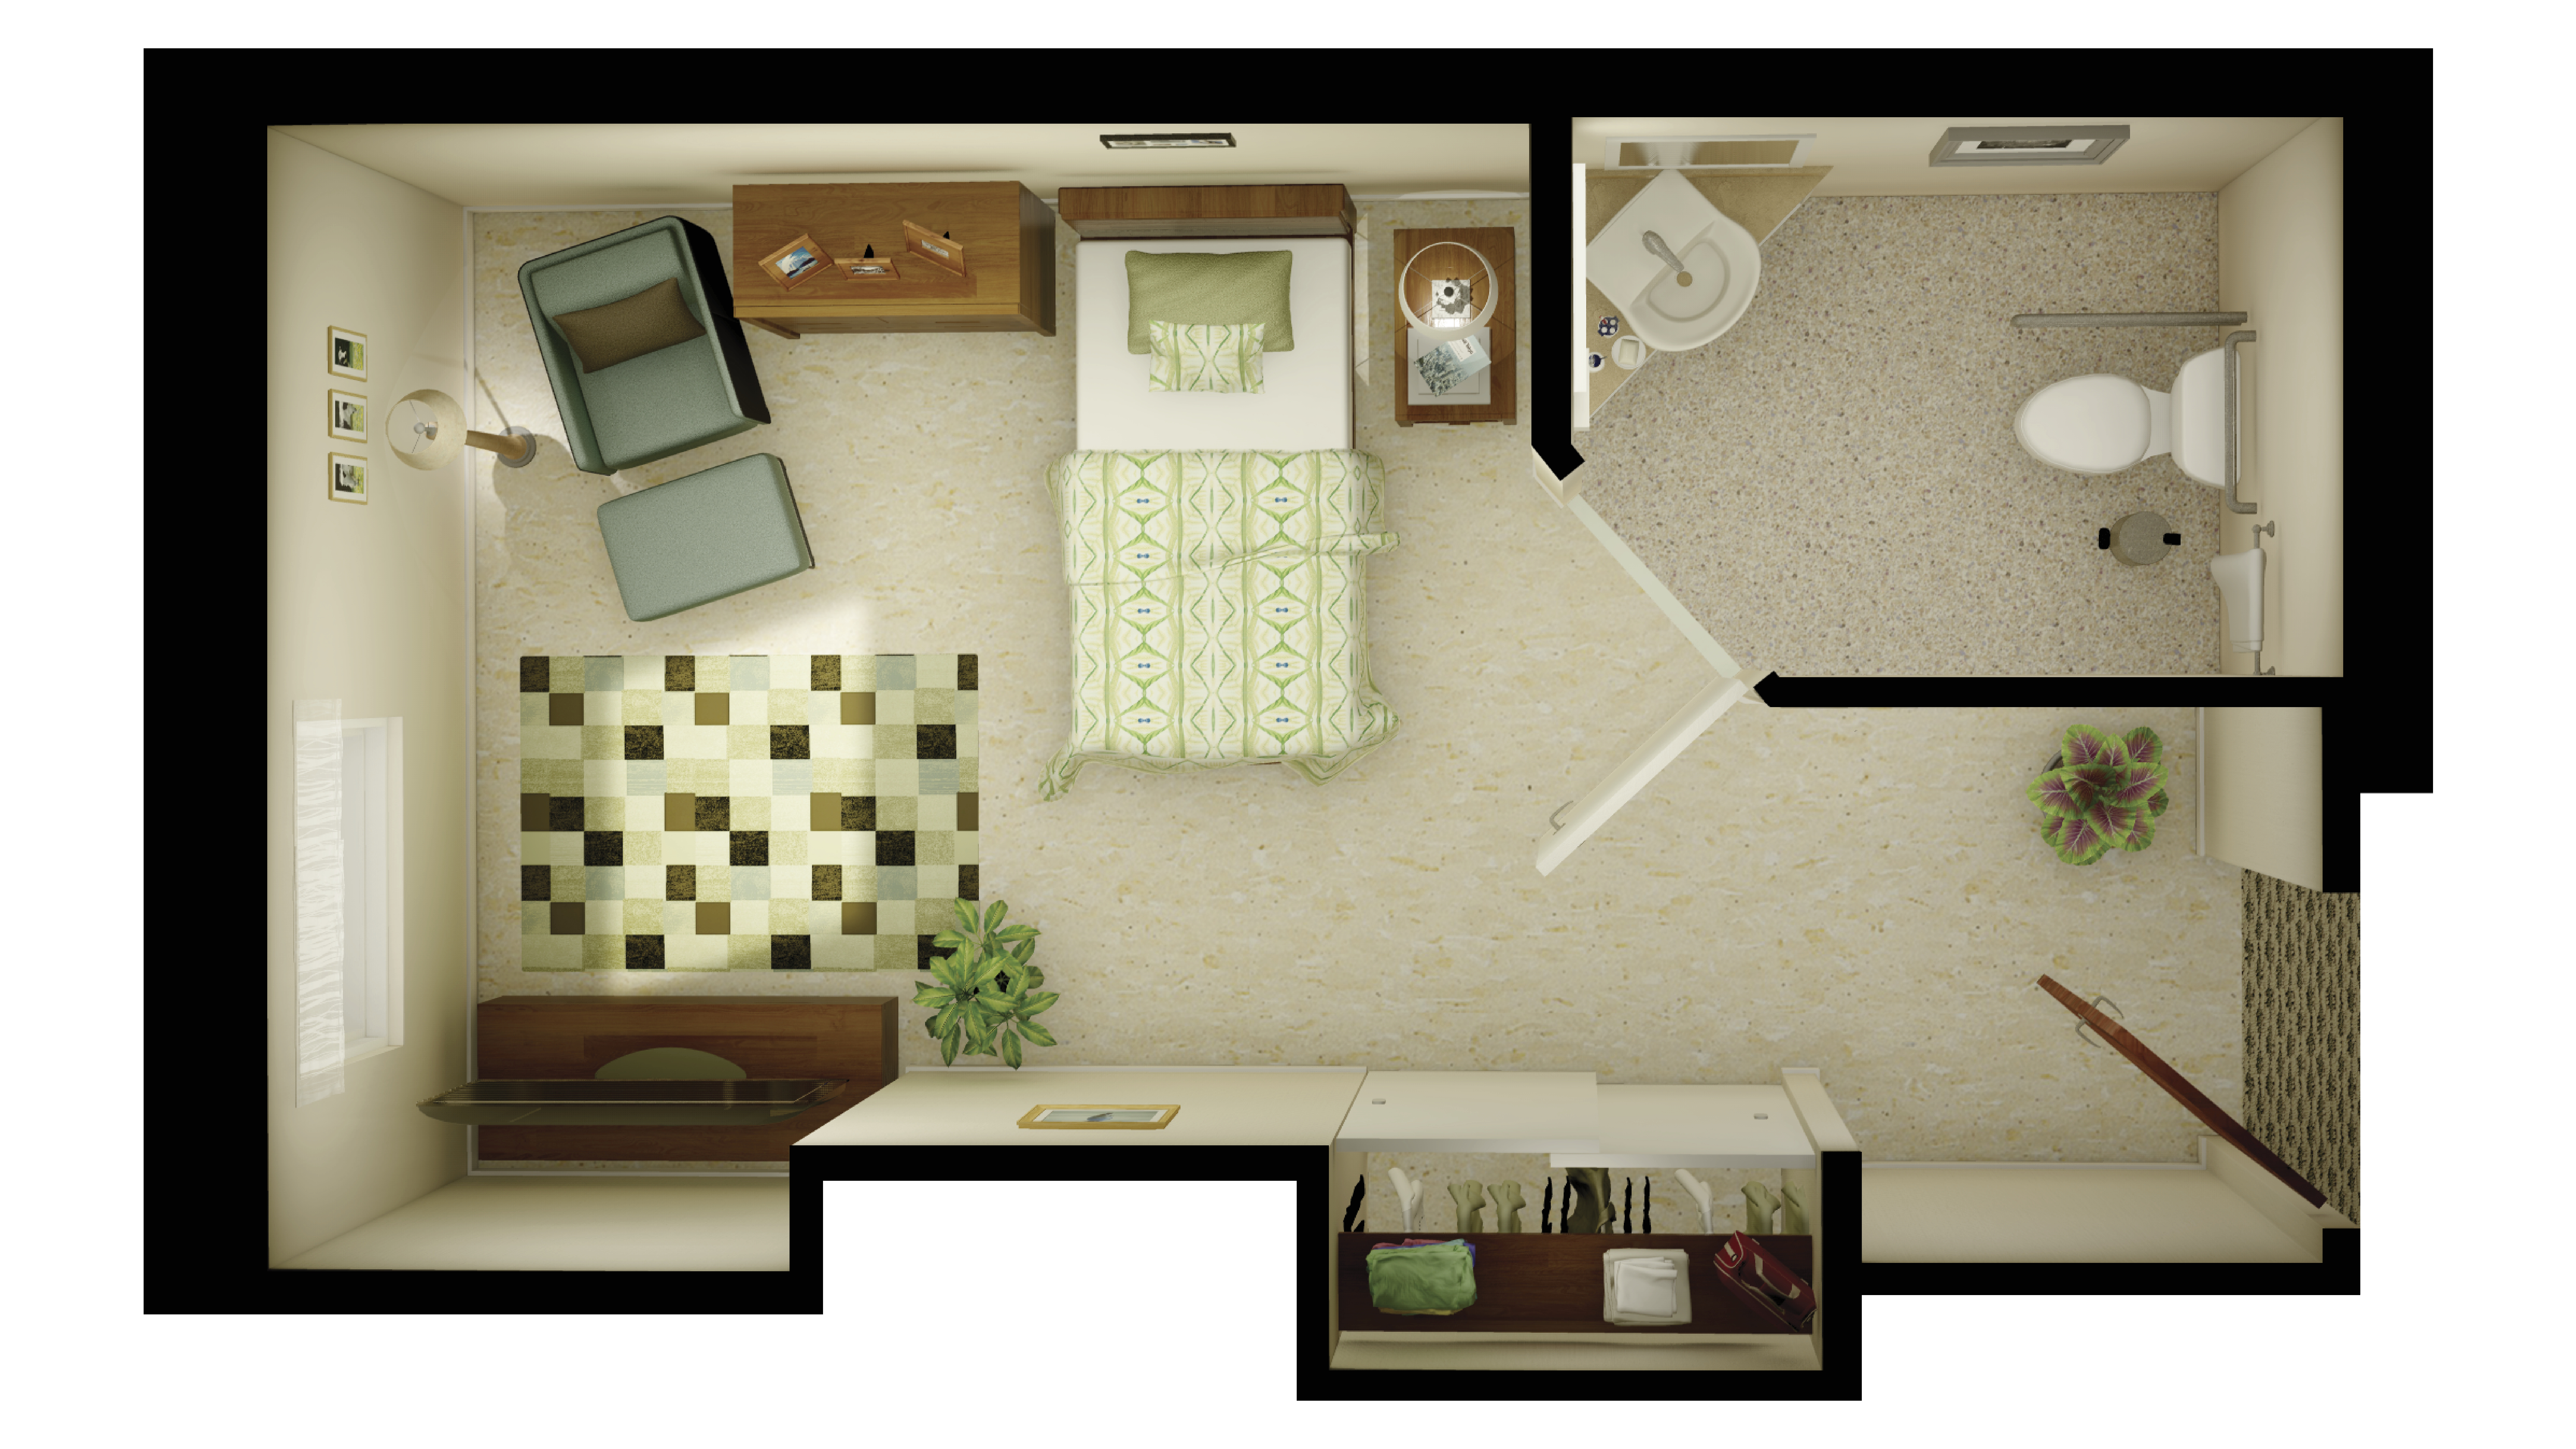 A sample floorplan of a private suite in long-term care